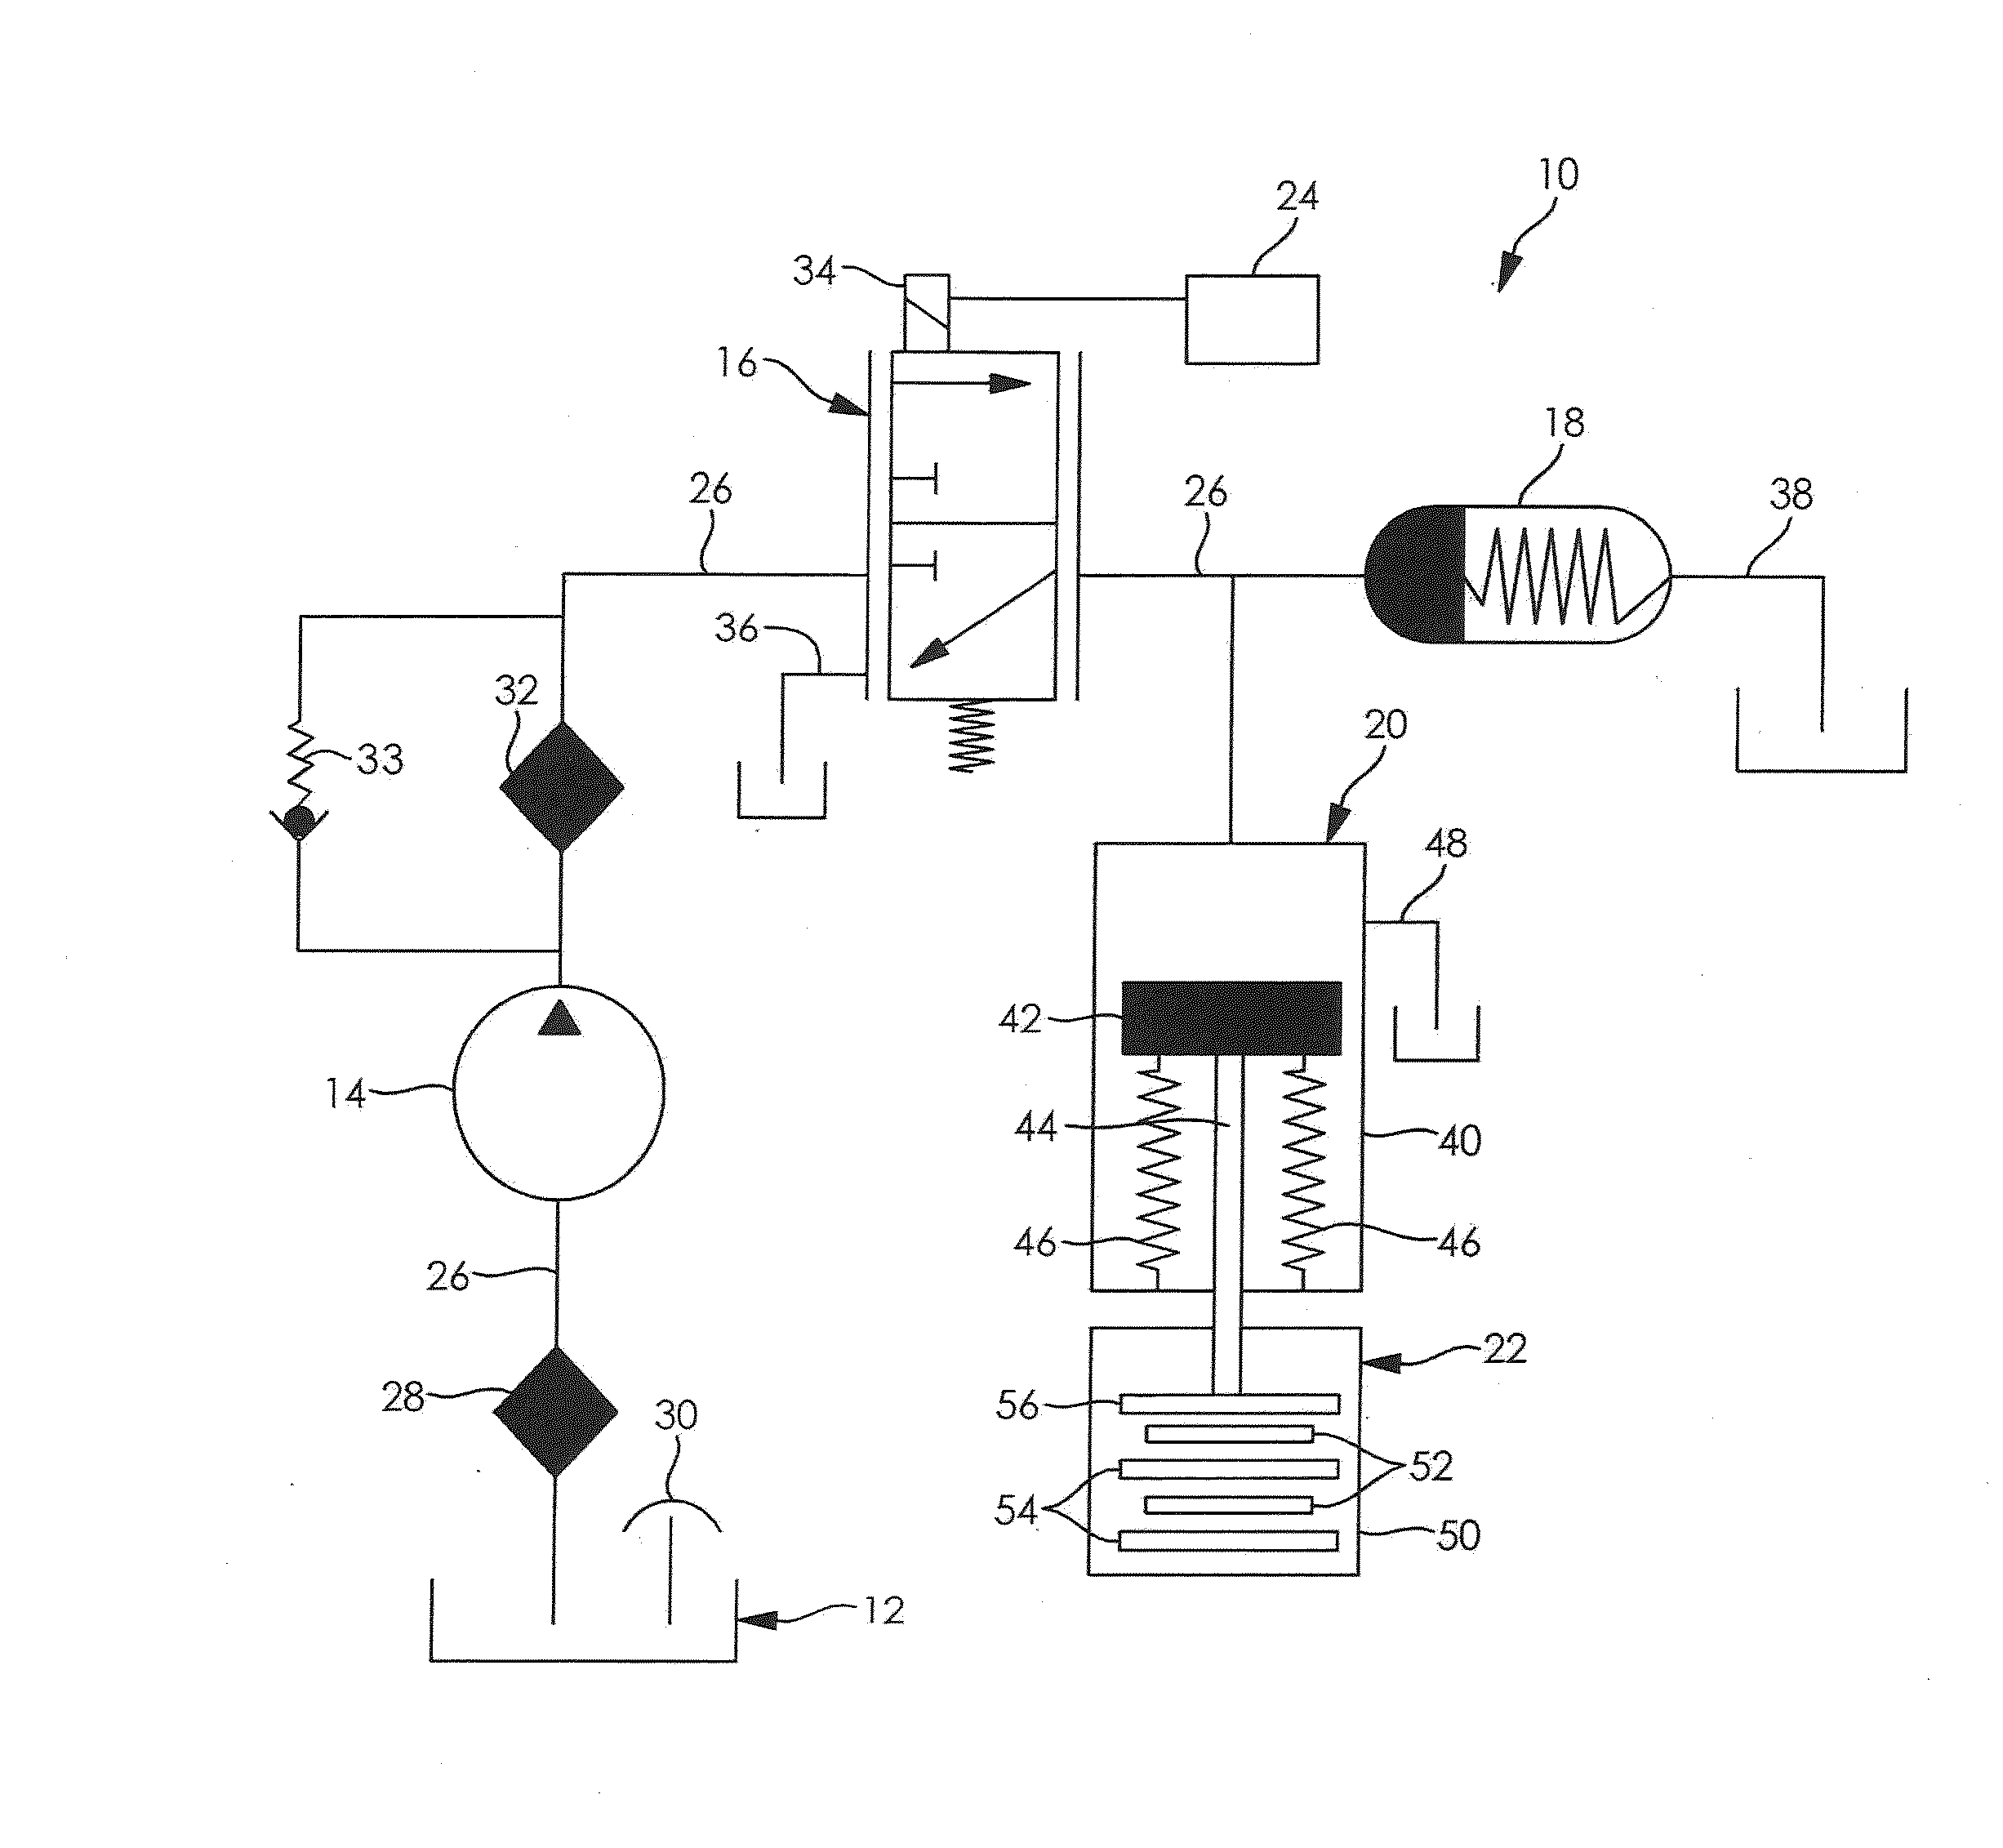 Apparatus and method for learning filling parameters for a clutch